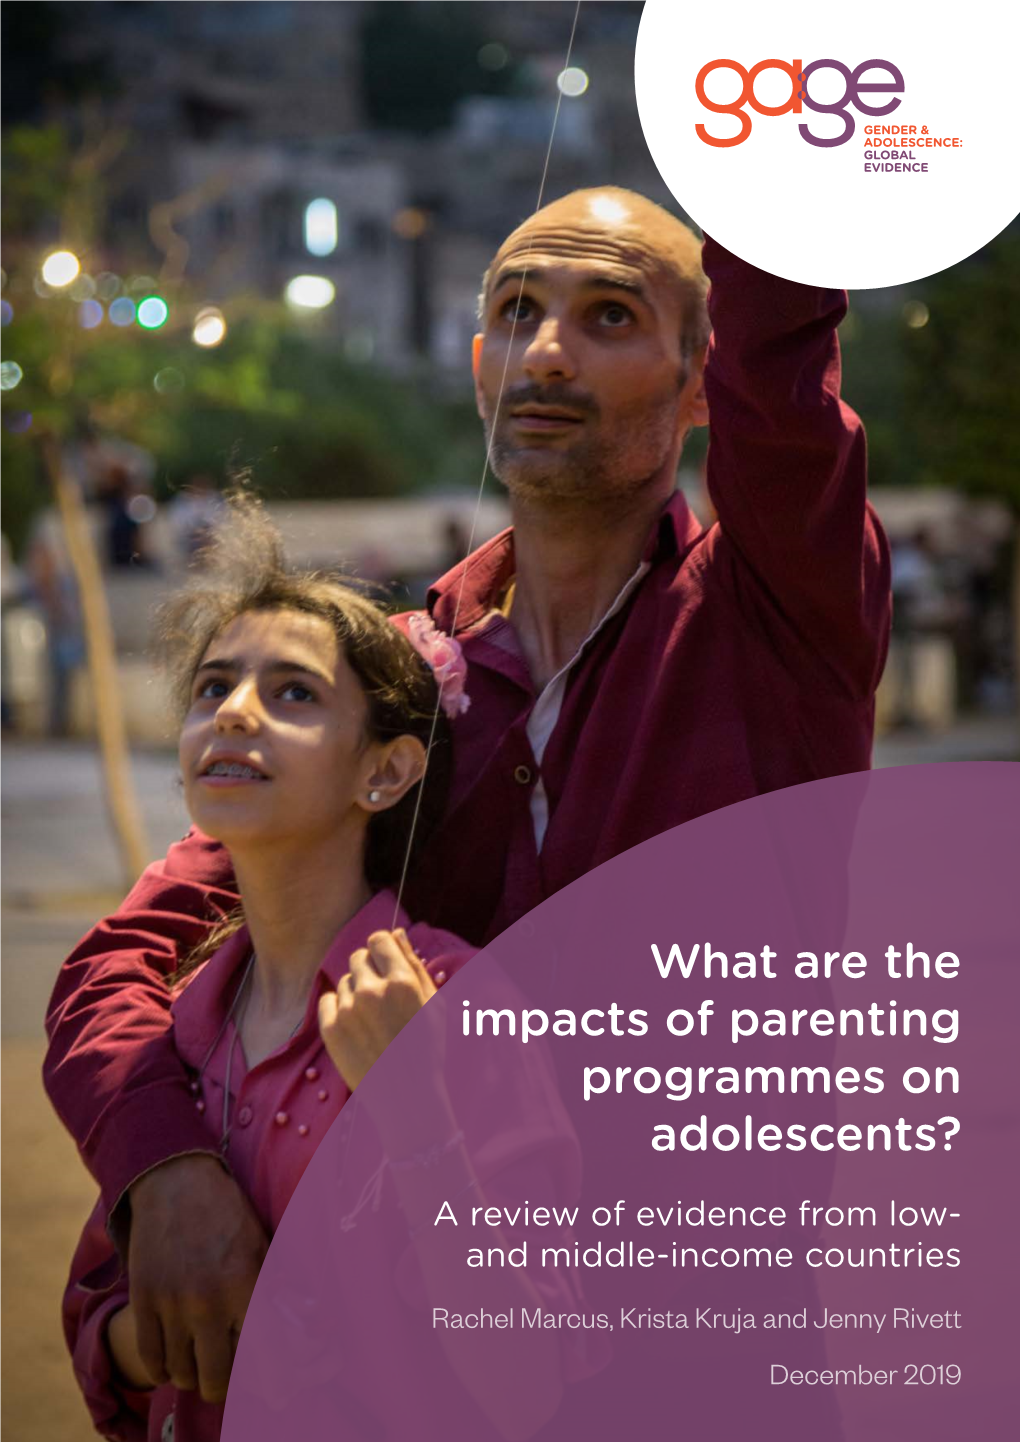 What Are the Impacts of Parenting Programmes on Adolescents?